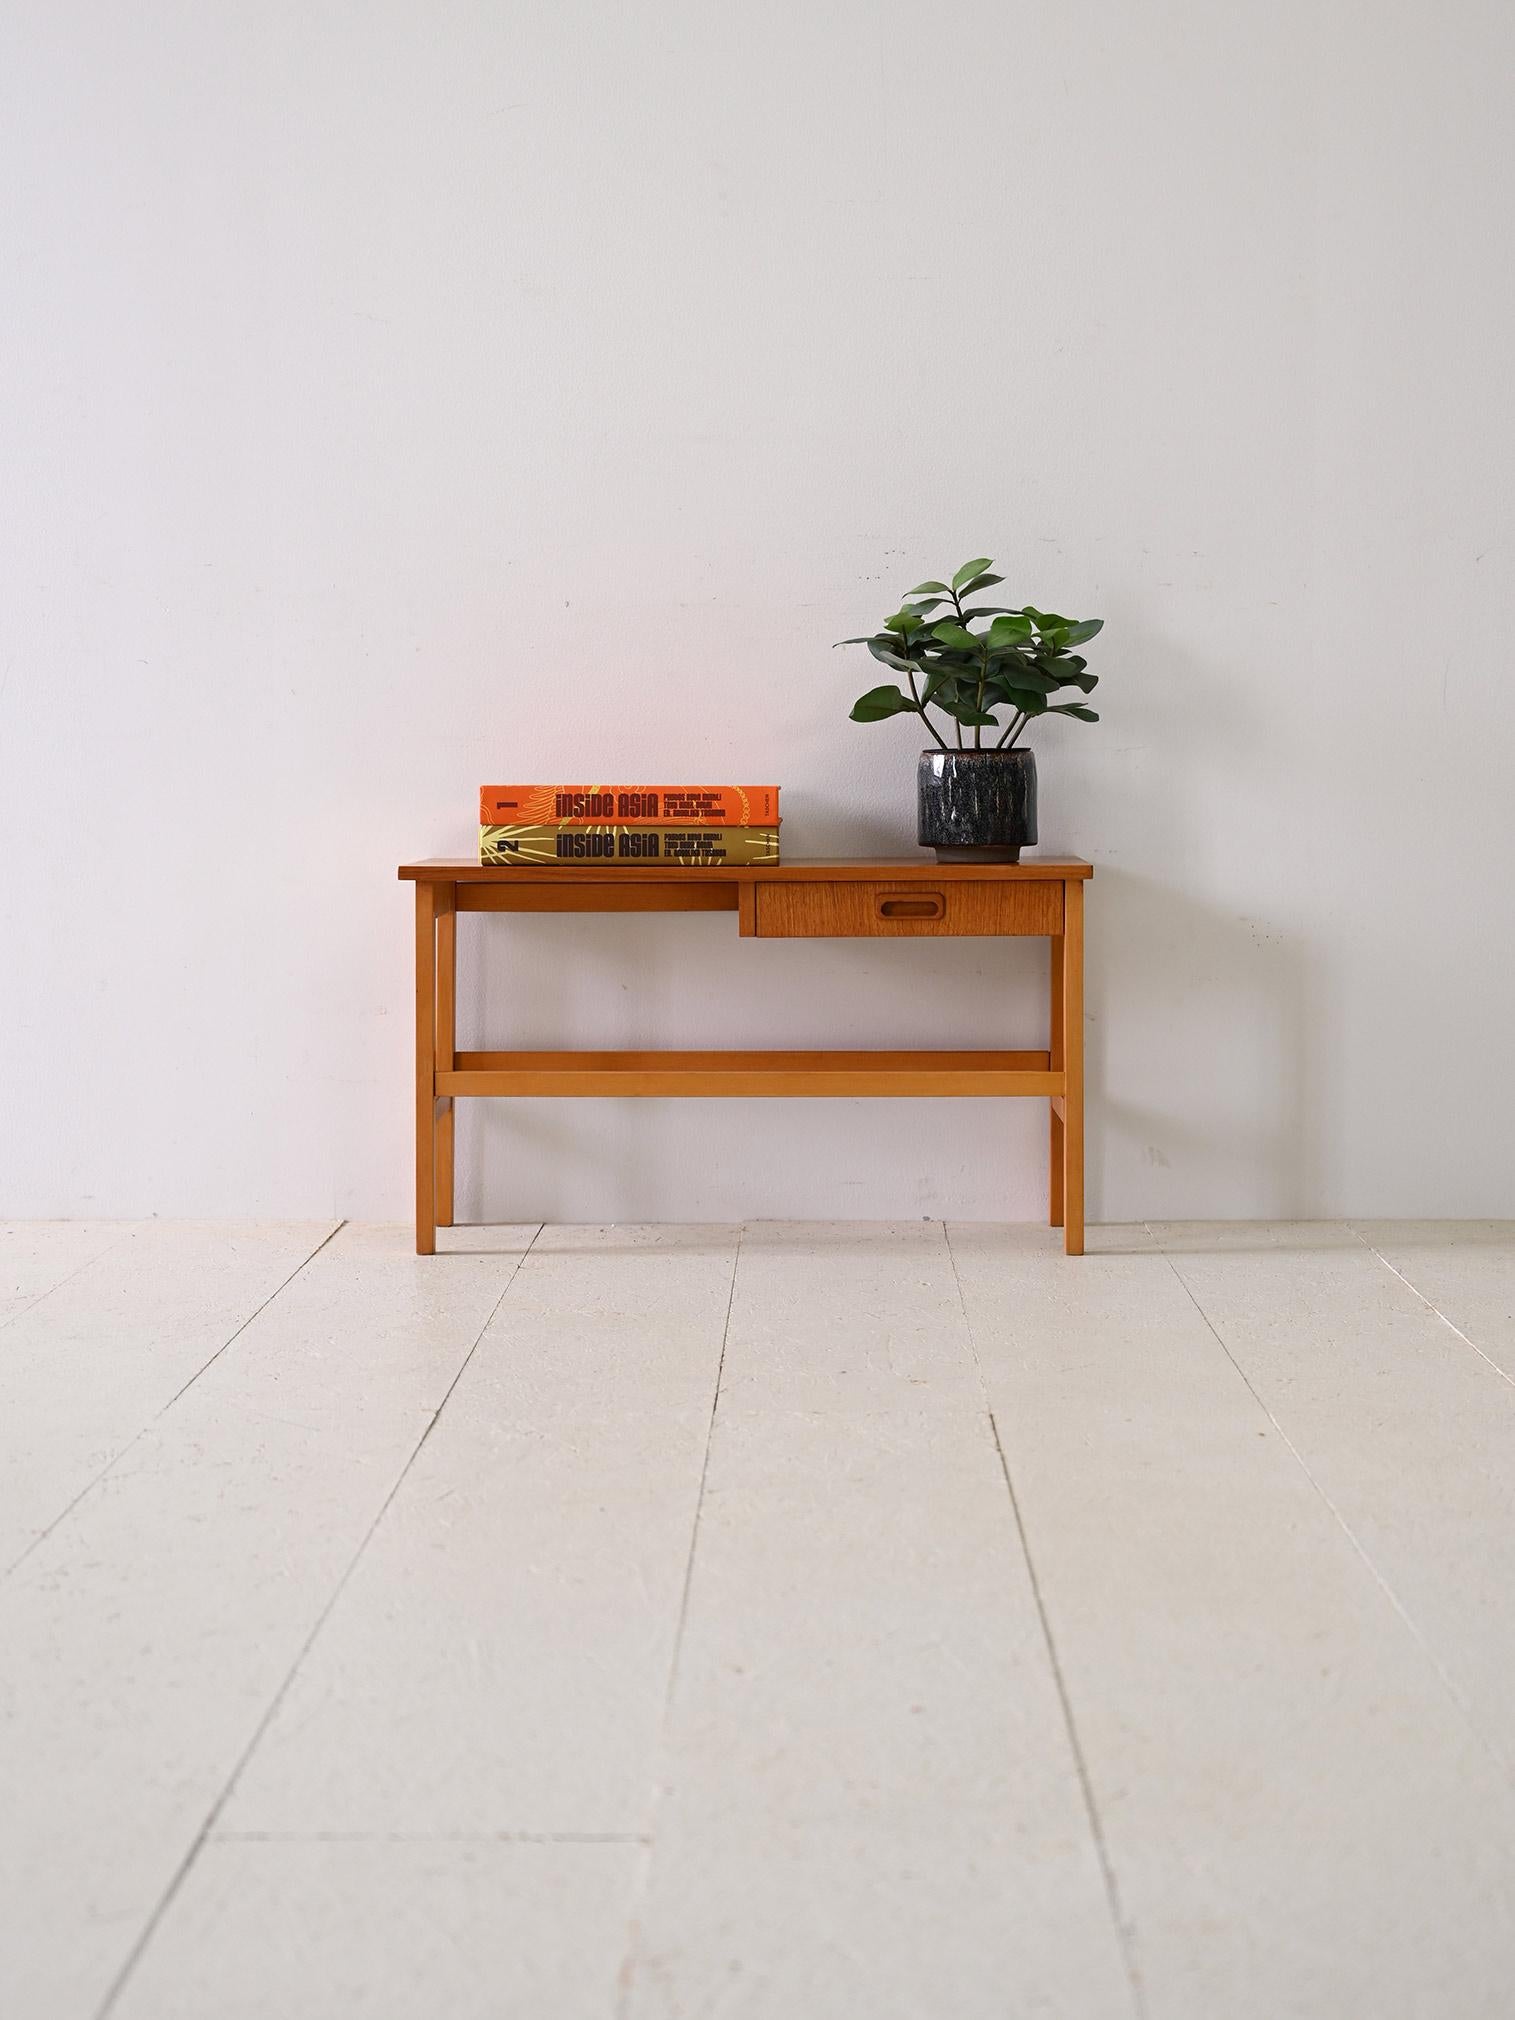 Scandinavian teak coffee table with drawer.

This Swedish teak coffee table from the 1960s features clean, simple lines that lend a timeless elegance. Square legs add sturdiness to its appearance, while the overall shape is enhanced by a drawer with